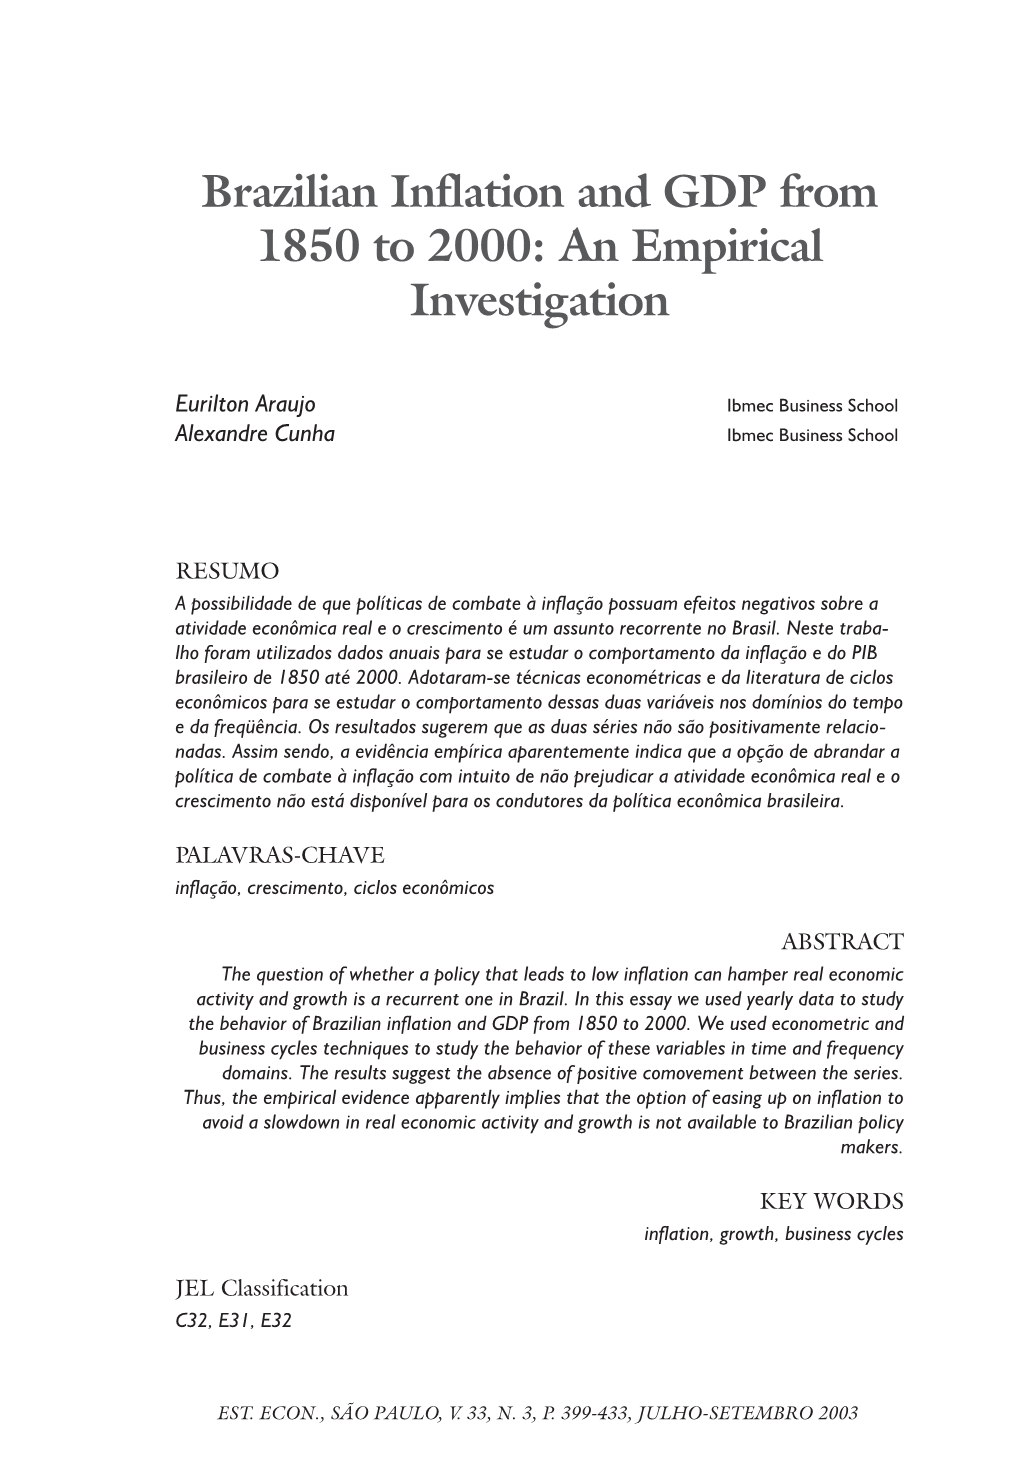 Brazilian Inflation and GDP from 1850 to 2000: an Empirical Investigation